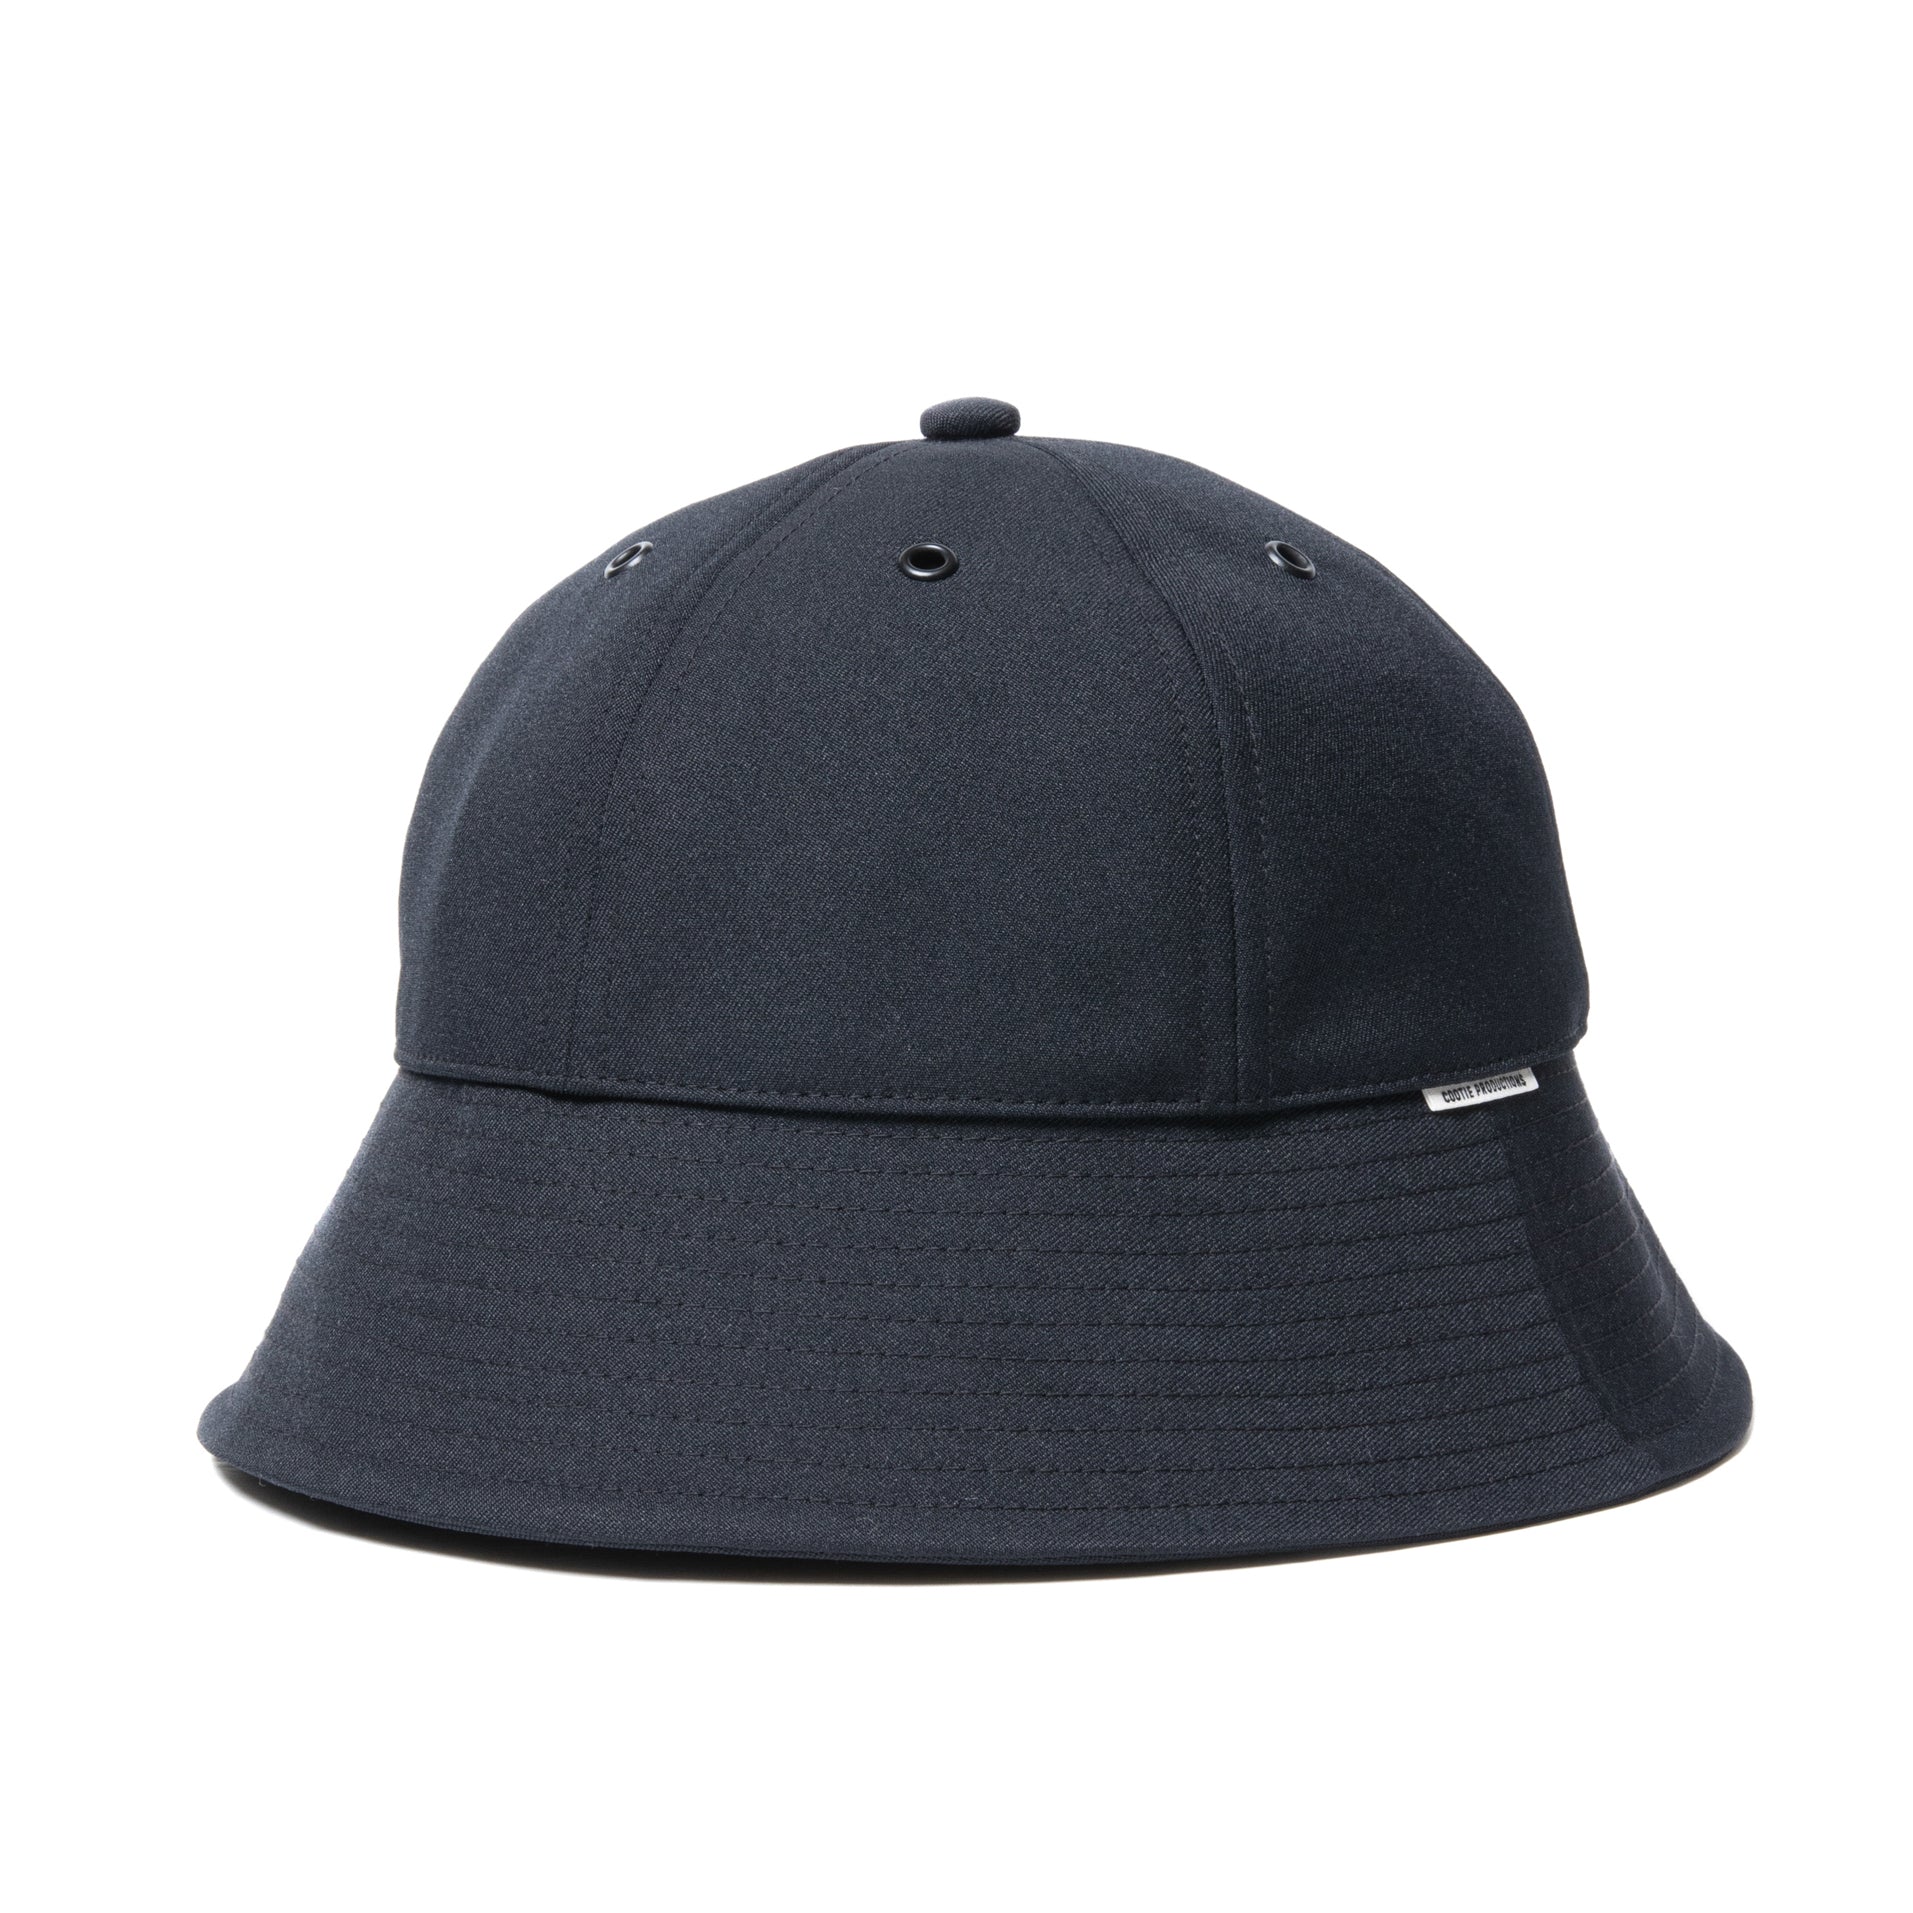 COOTIE(クーティー) / Polyester Twill Ball Hat (Black)